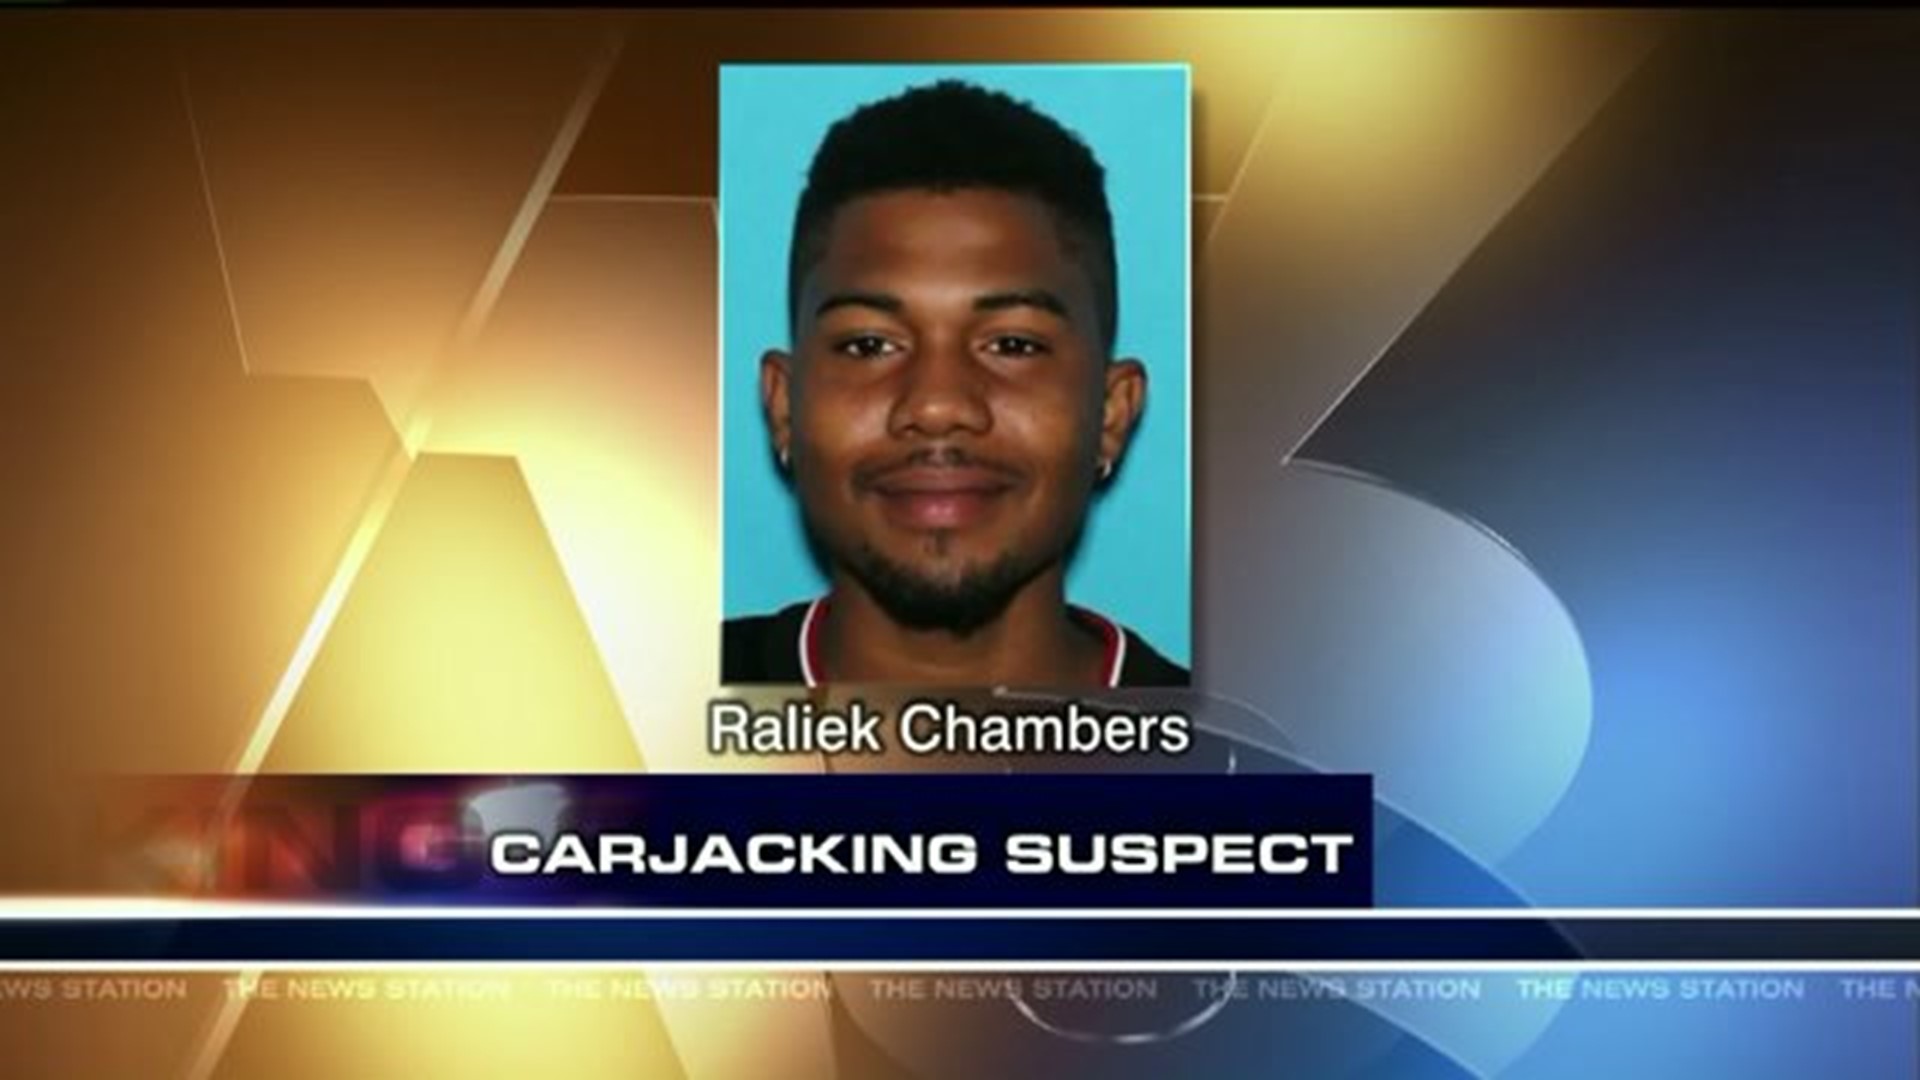 More Charges Filed Against Man Accused of Carjacking, Kidnapping Woman